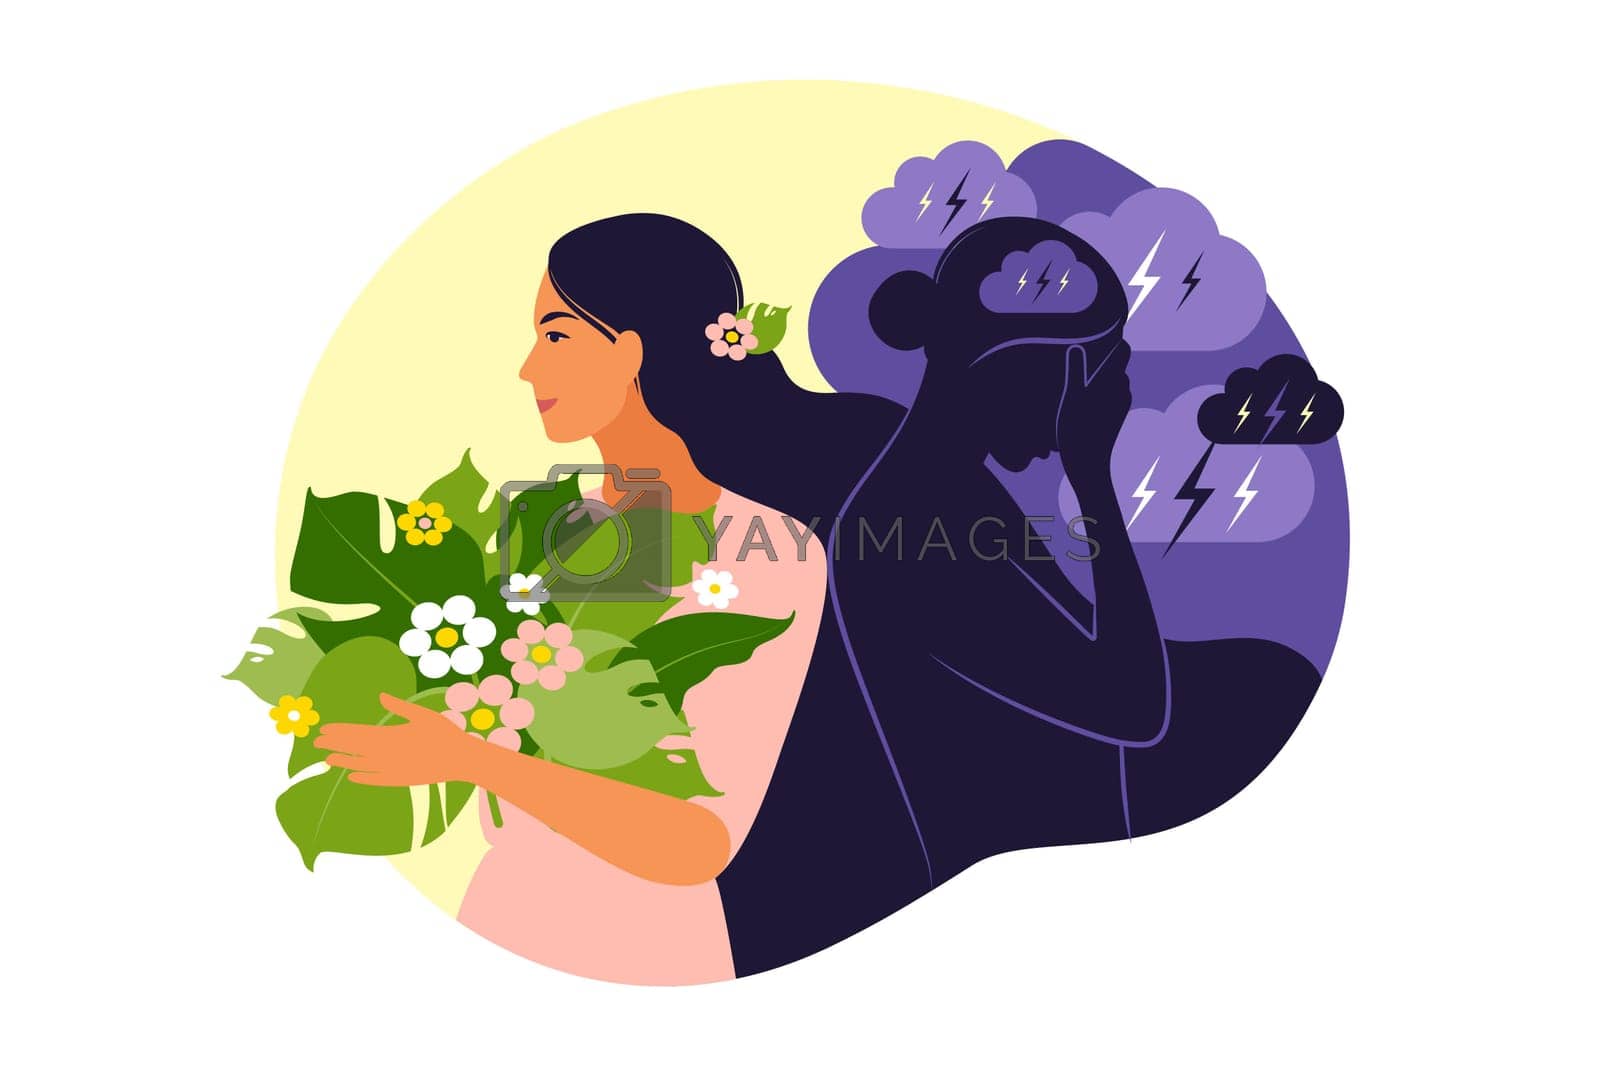 Royalty free image of Psychotherapy or psychology support concept. Two woman different states of consciousness mind - depression and positive mental health mood. Vector illustration. Flat by Elena_Kalinicheva